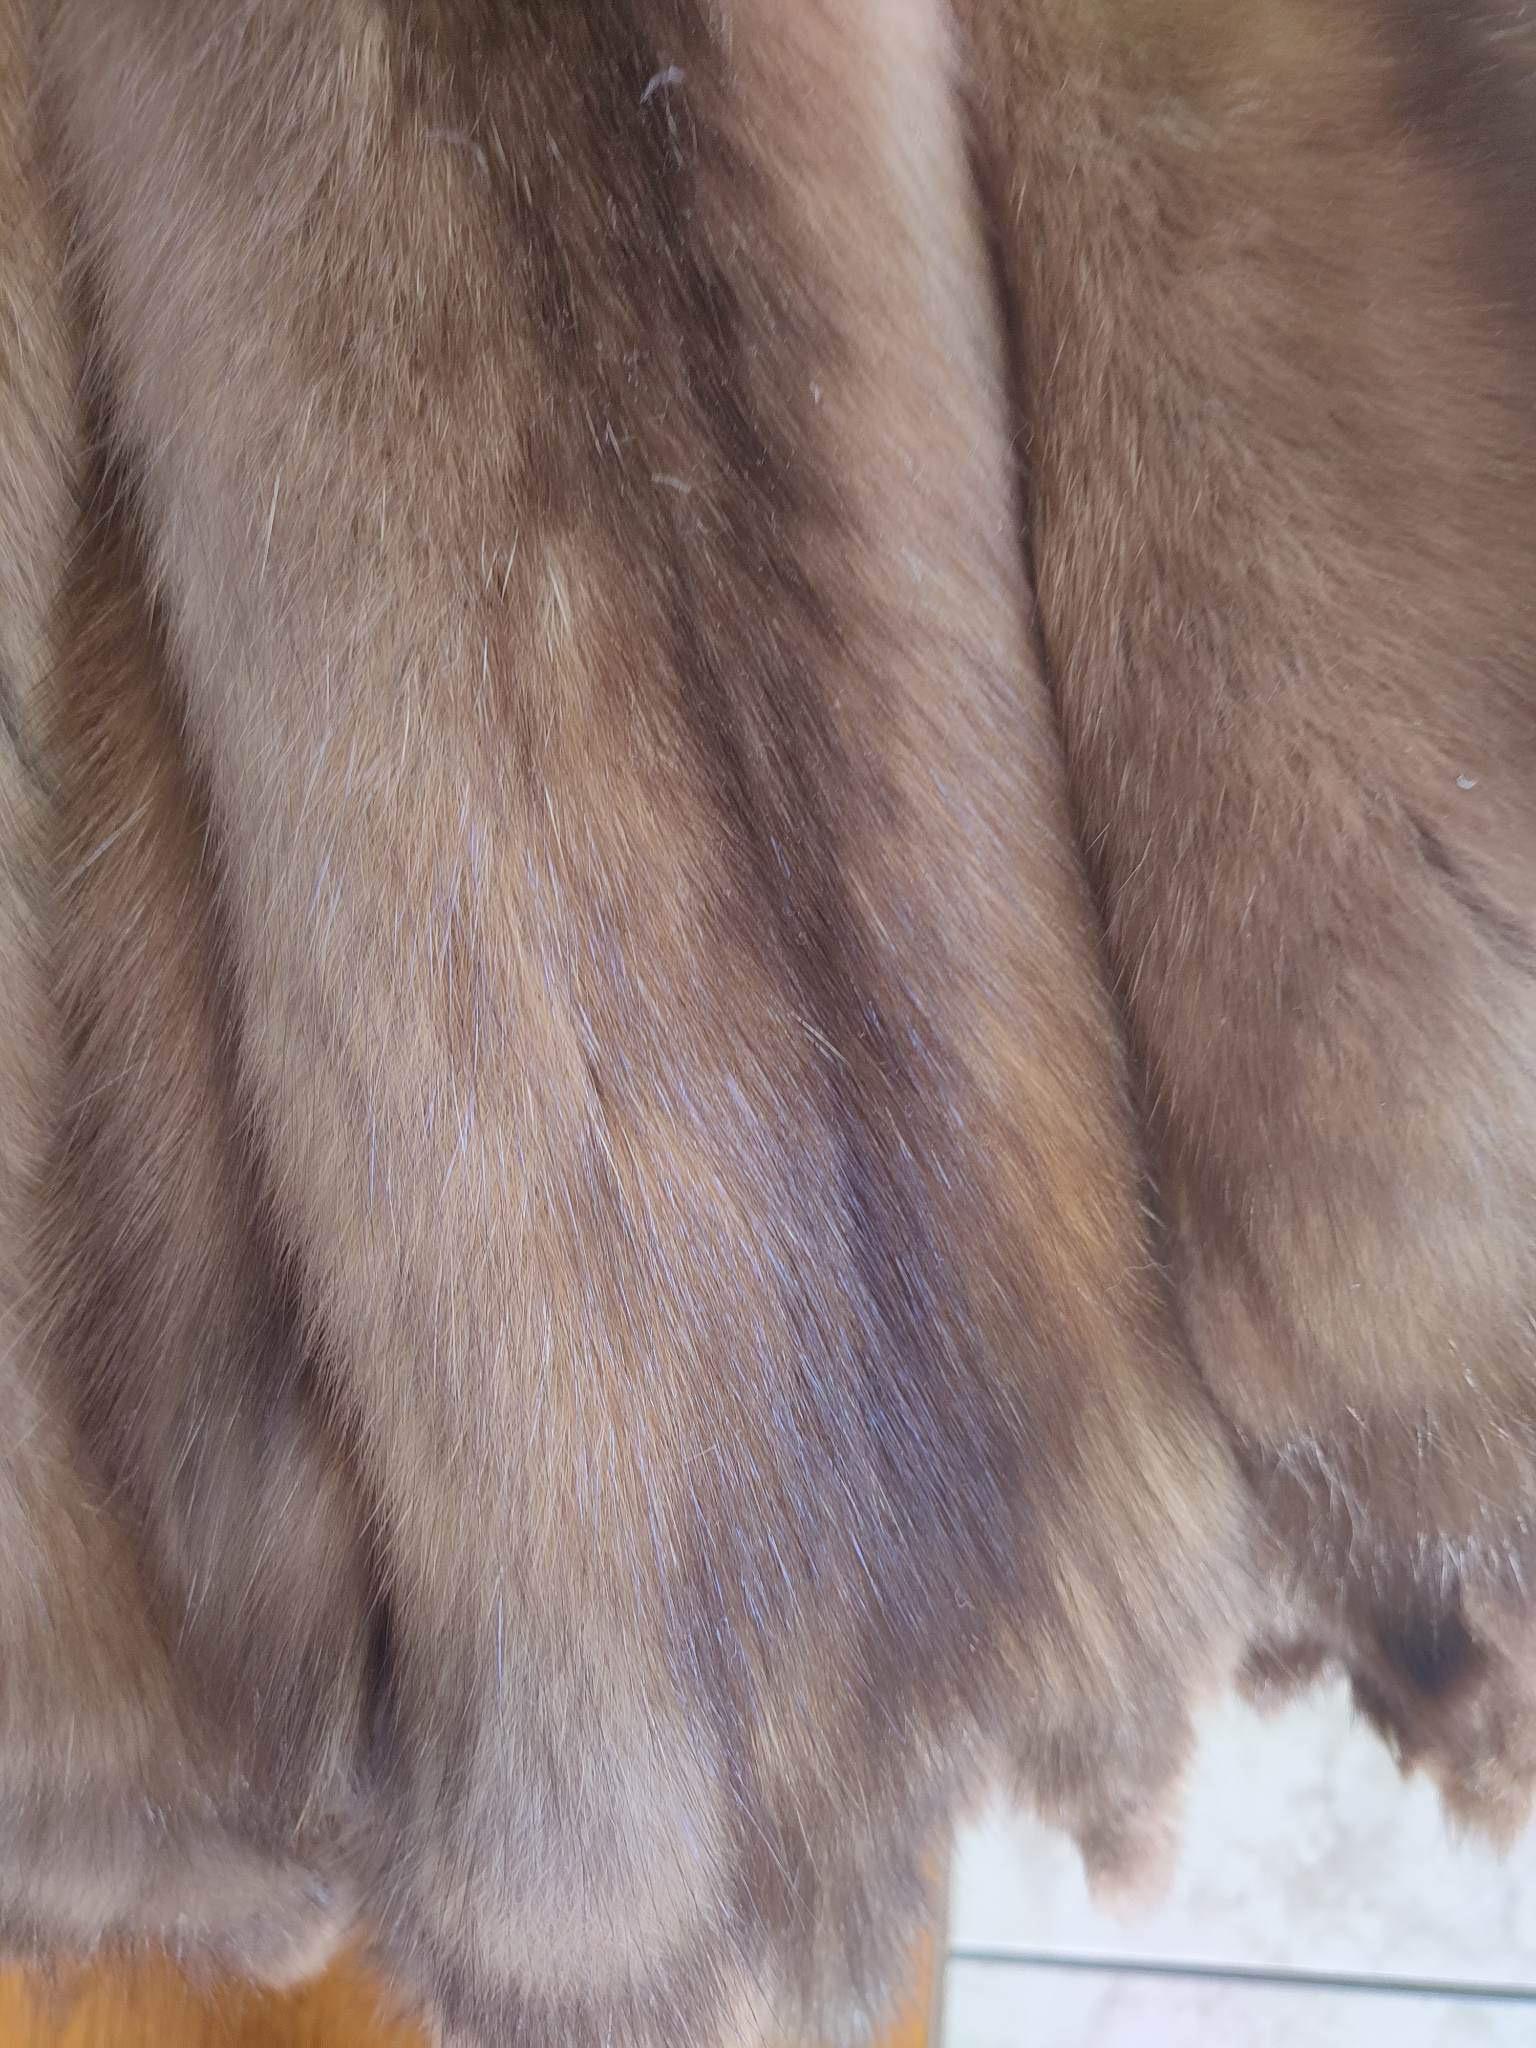 Women's Brand Russian new sable fur coat size M For Sale